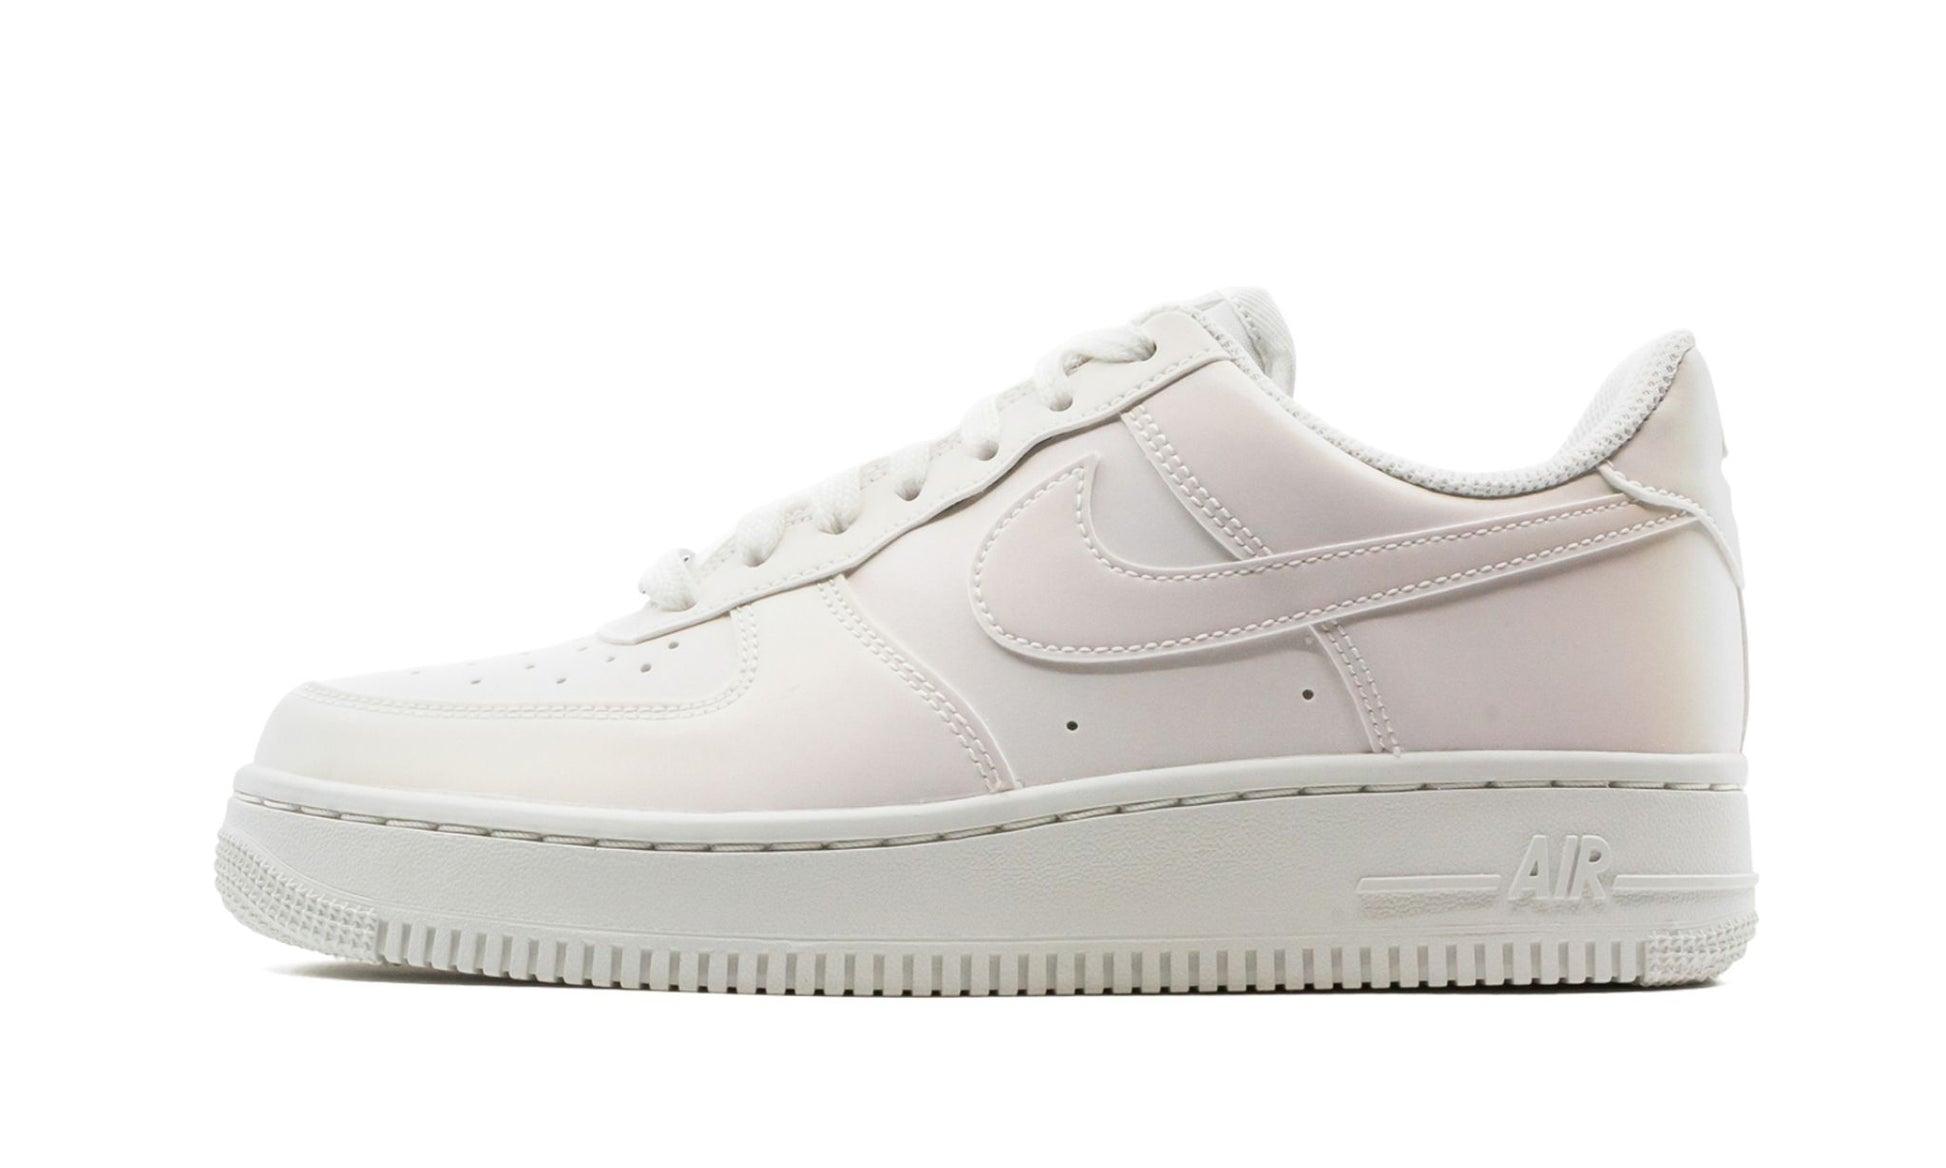 Wmns Air Force 1 '07 "Reflective White"